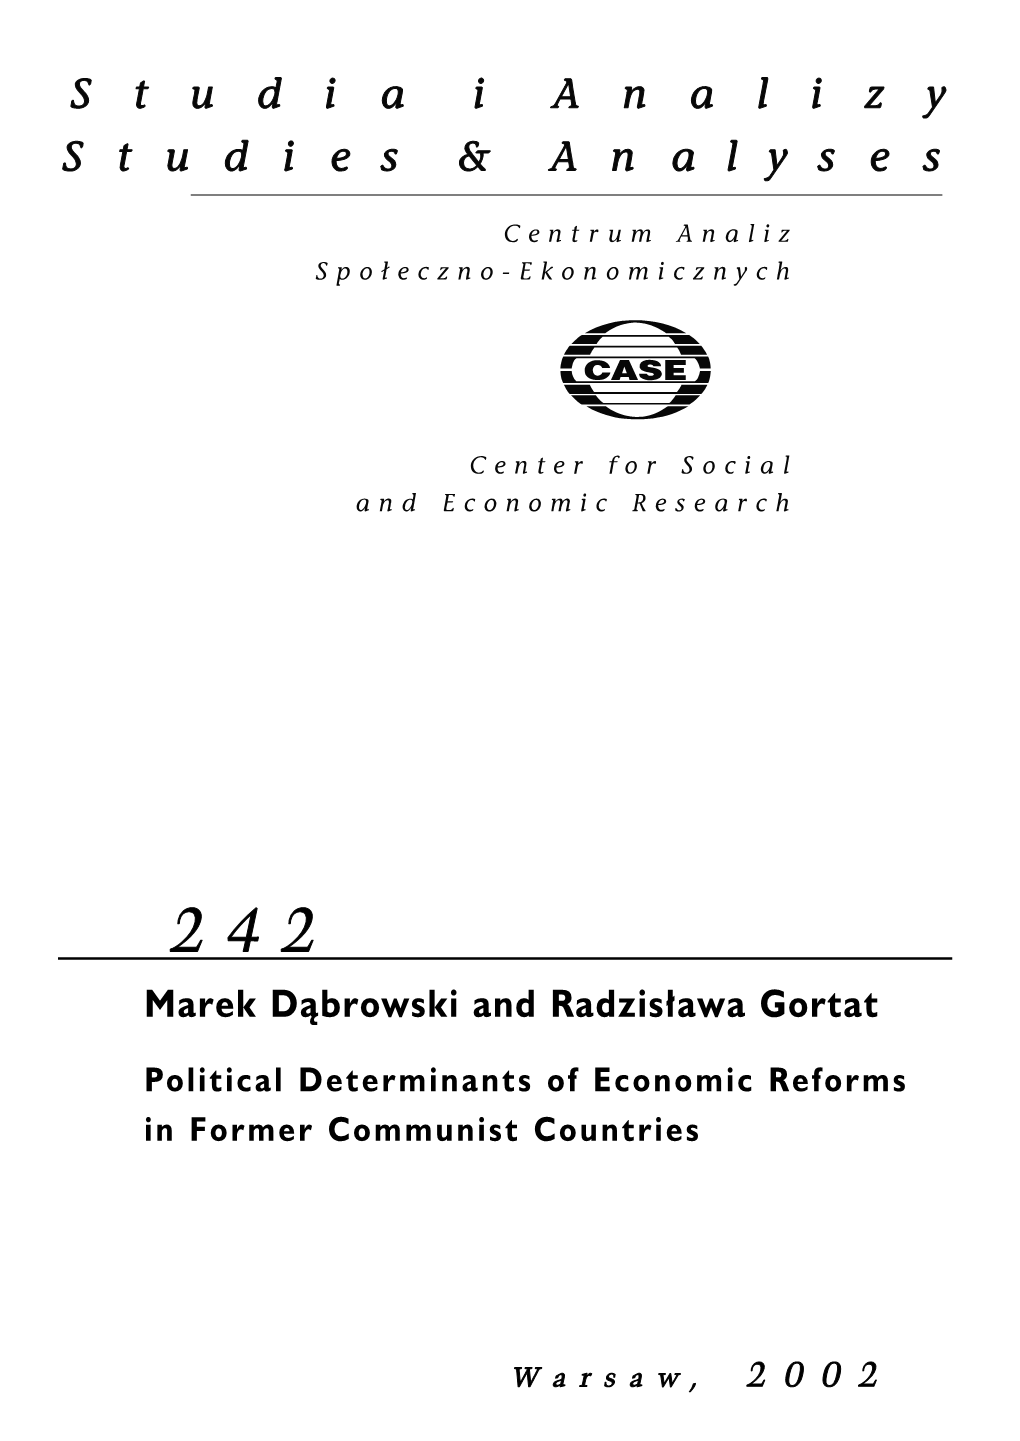 Political Determinants of Economic Reforms in Former Communist Countries